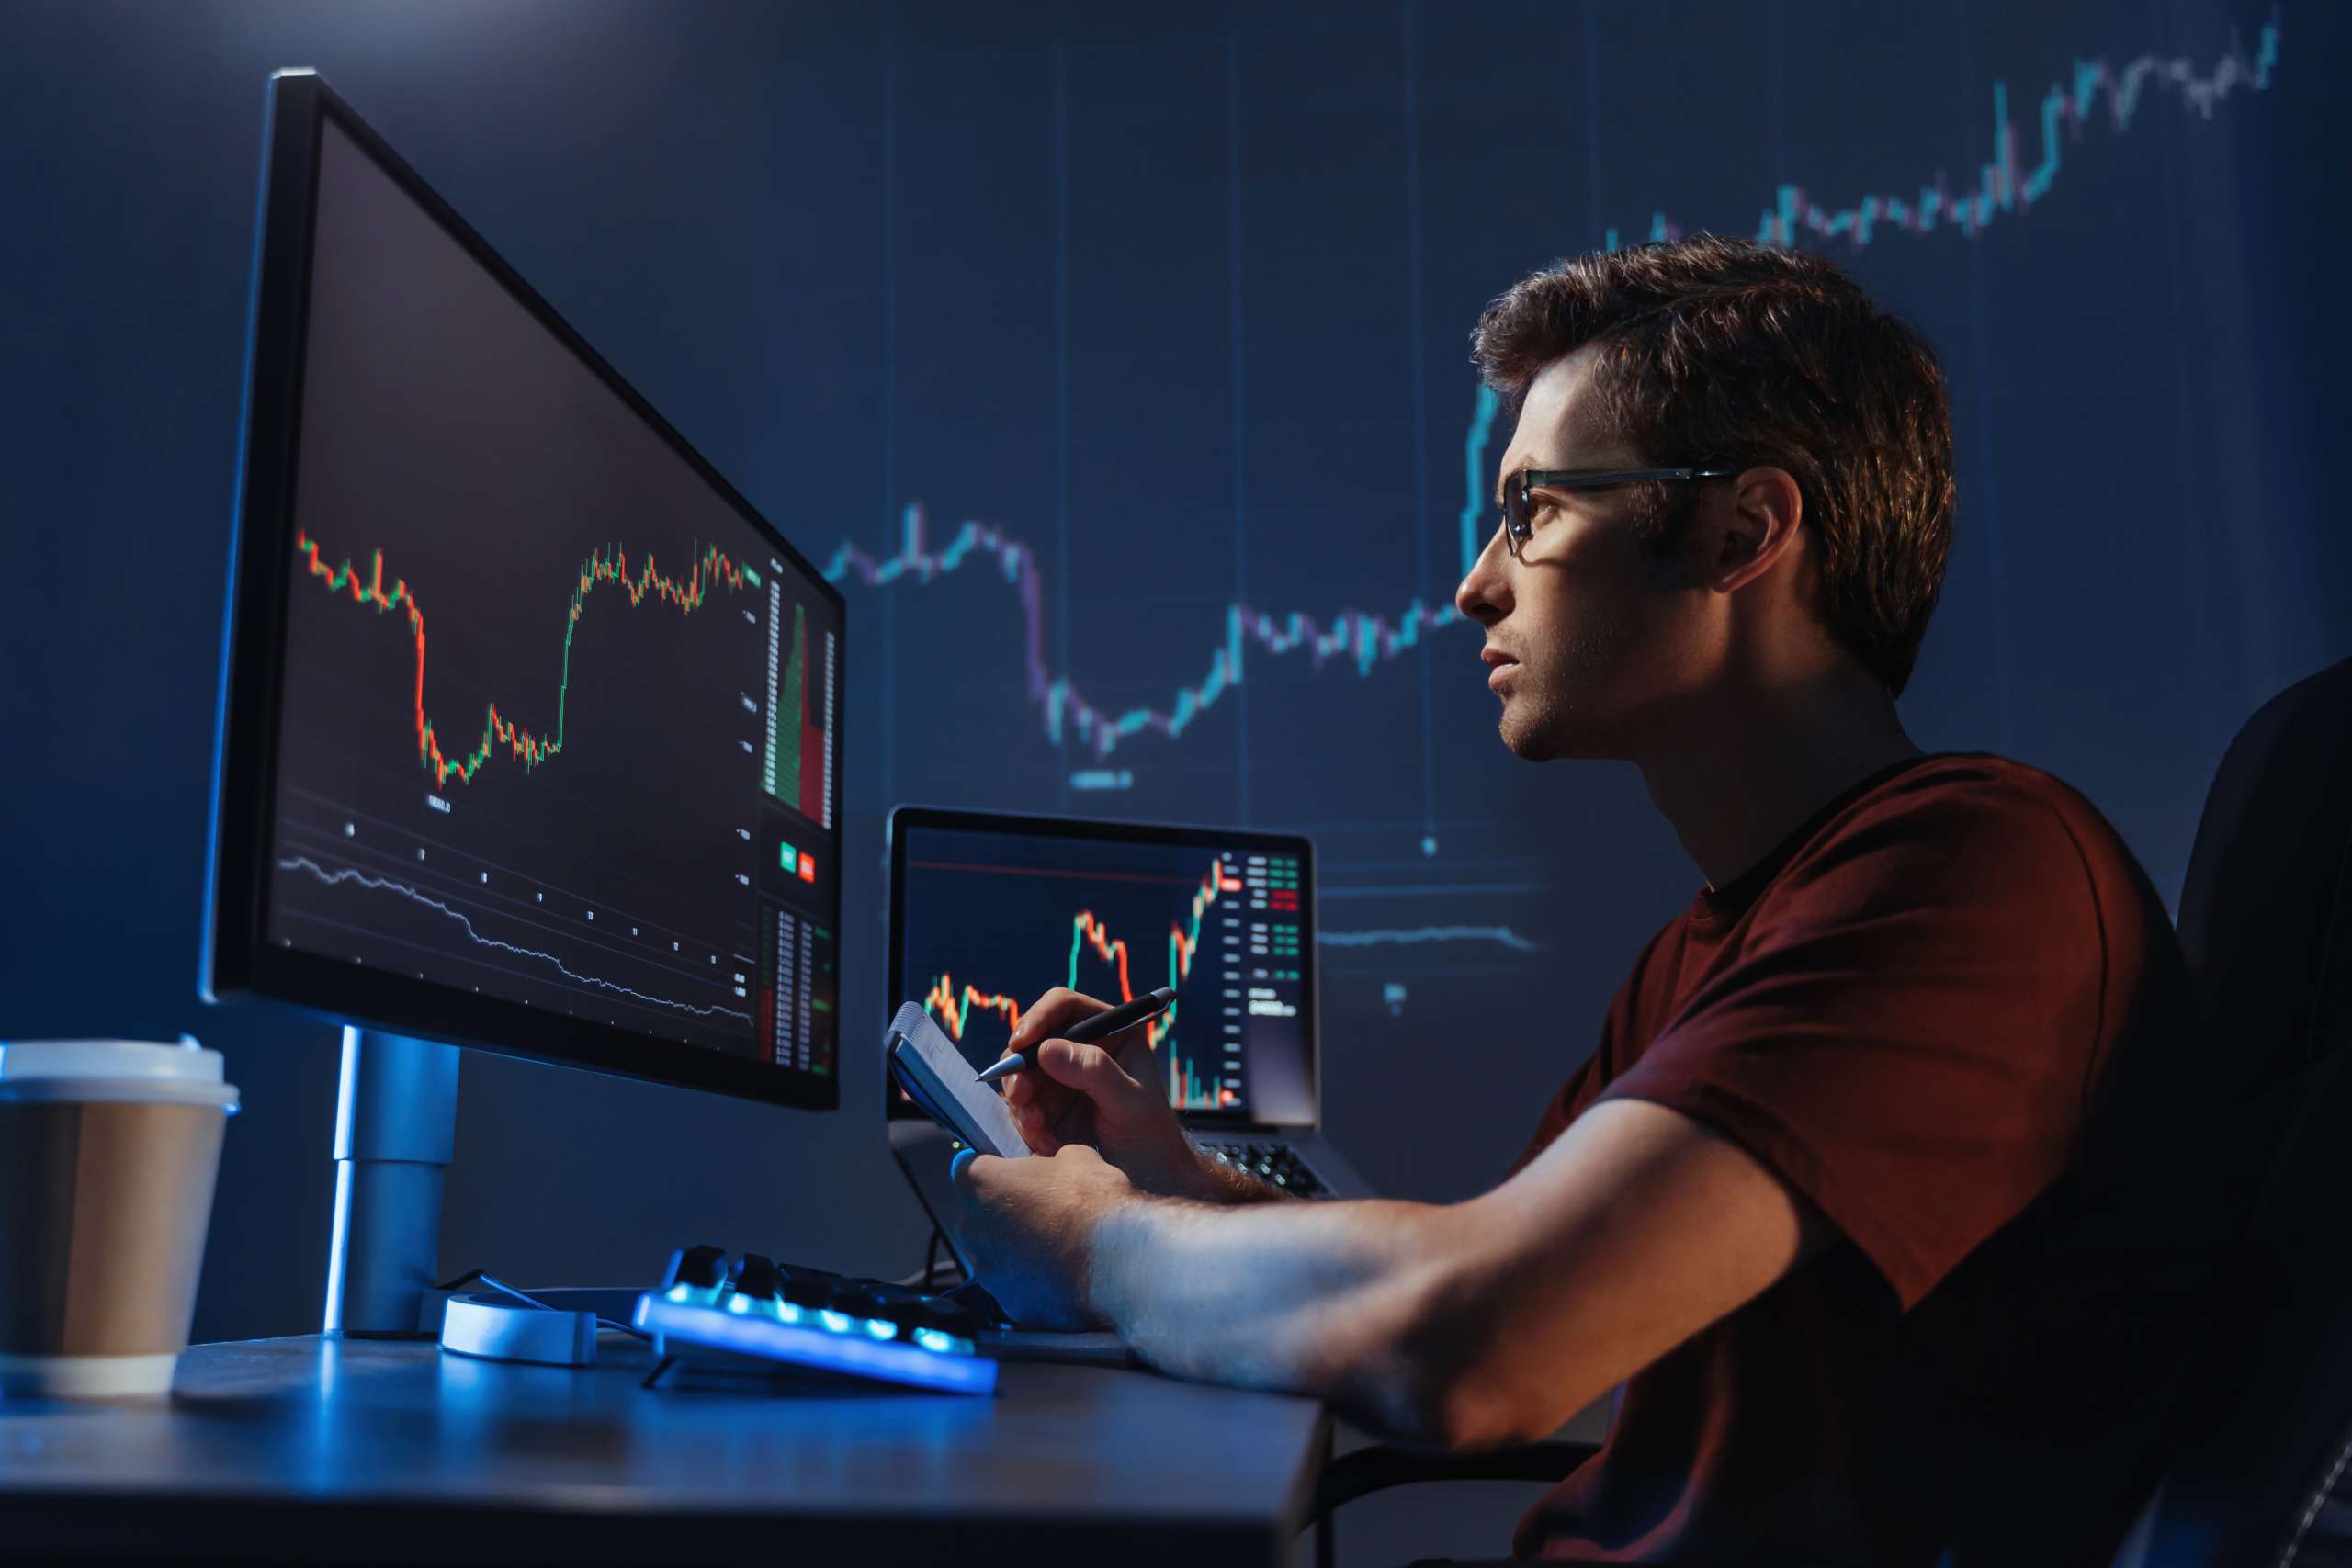 man trader analyst at working table analyzing fin 2023 11 27 04 51 29 utc 290120240609 scaled man trader analyst at working table analyzing fin 2023 11 27 04 51 29 utc 290120240609 scaled